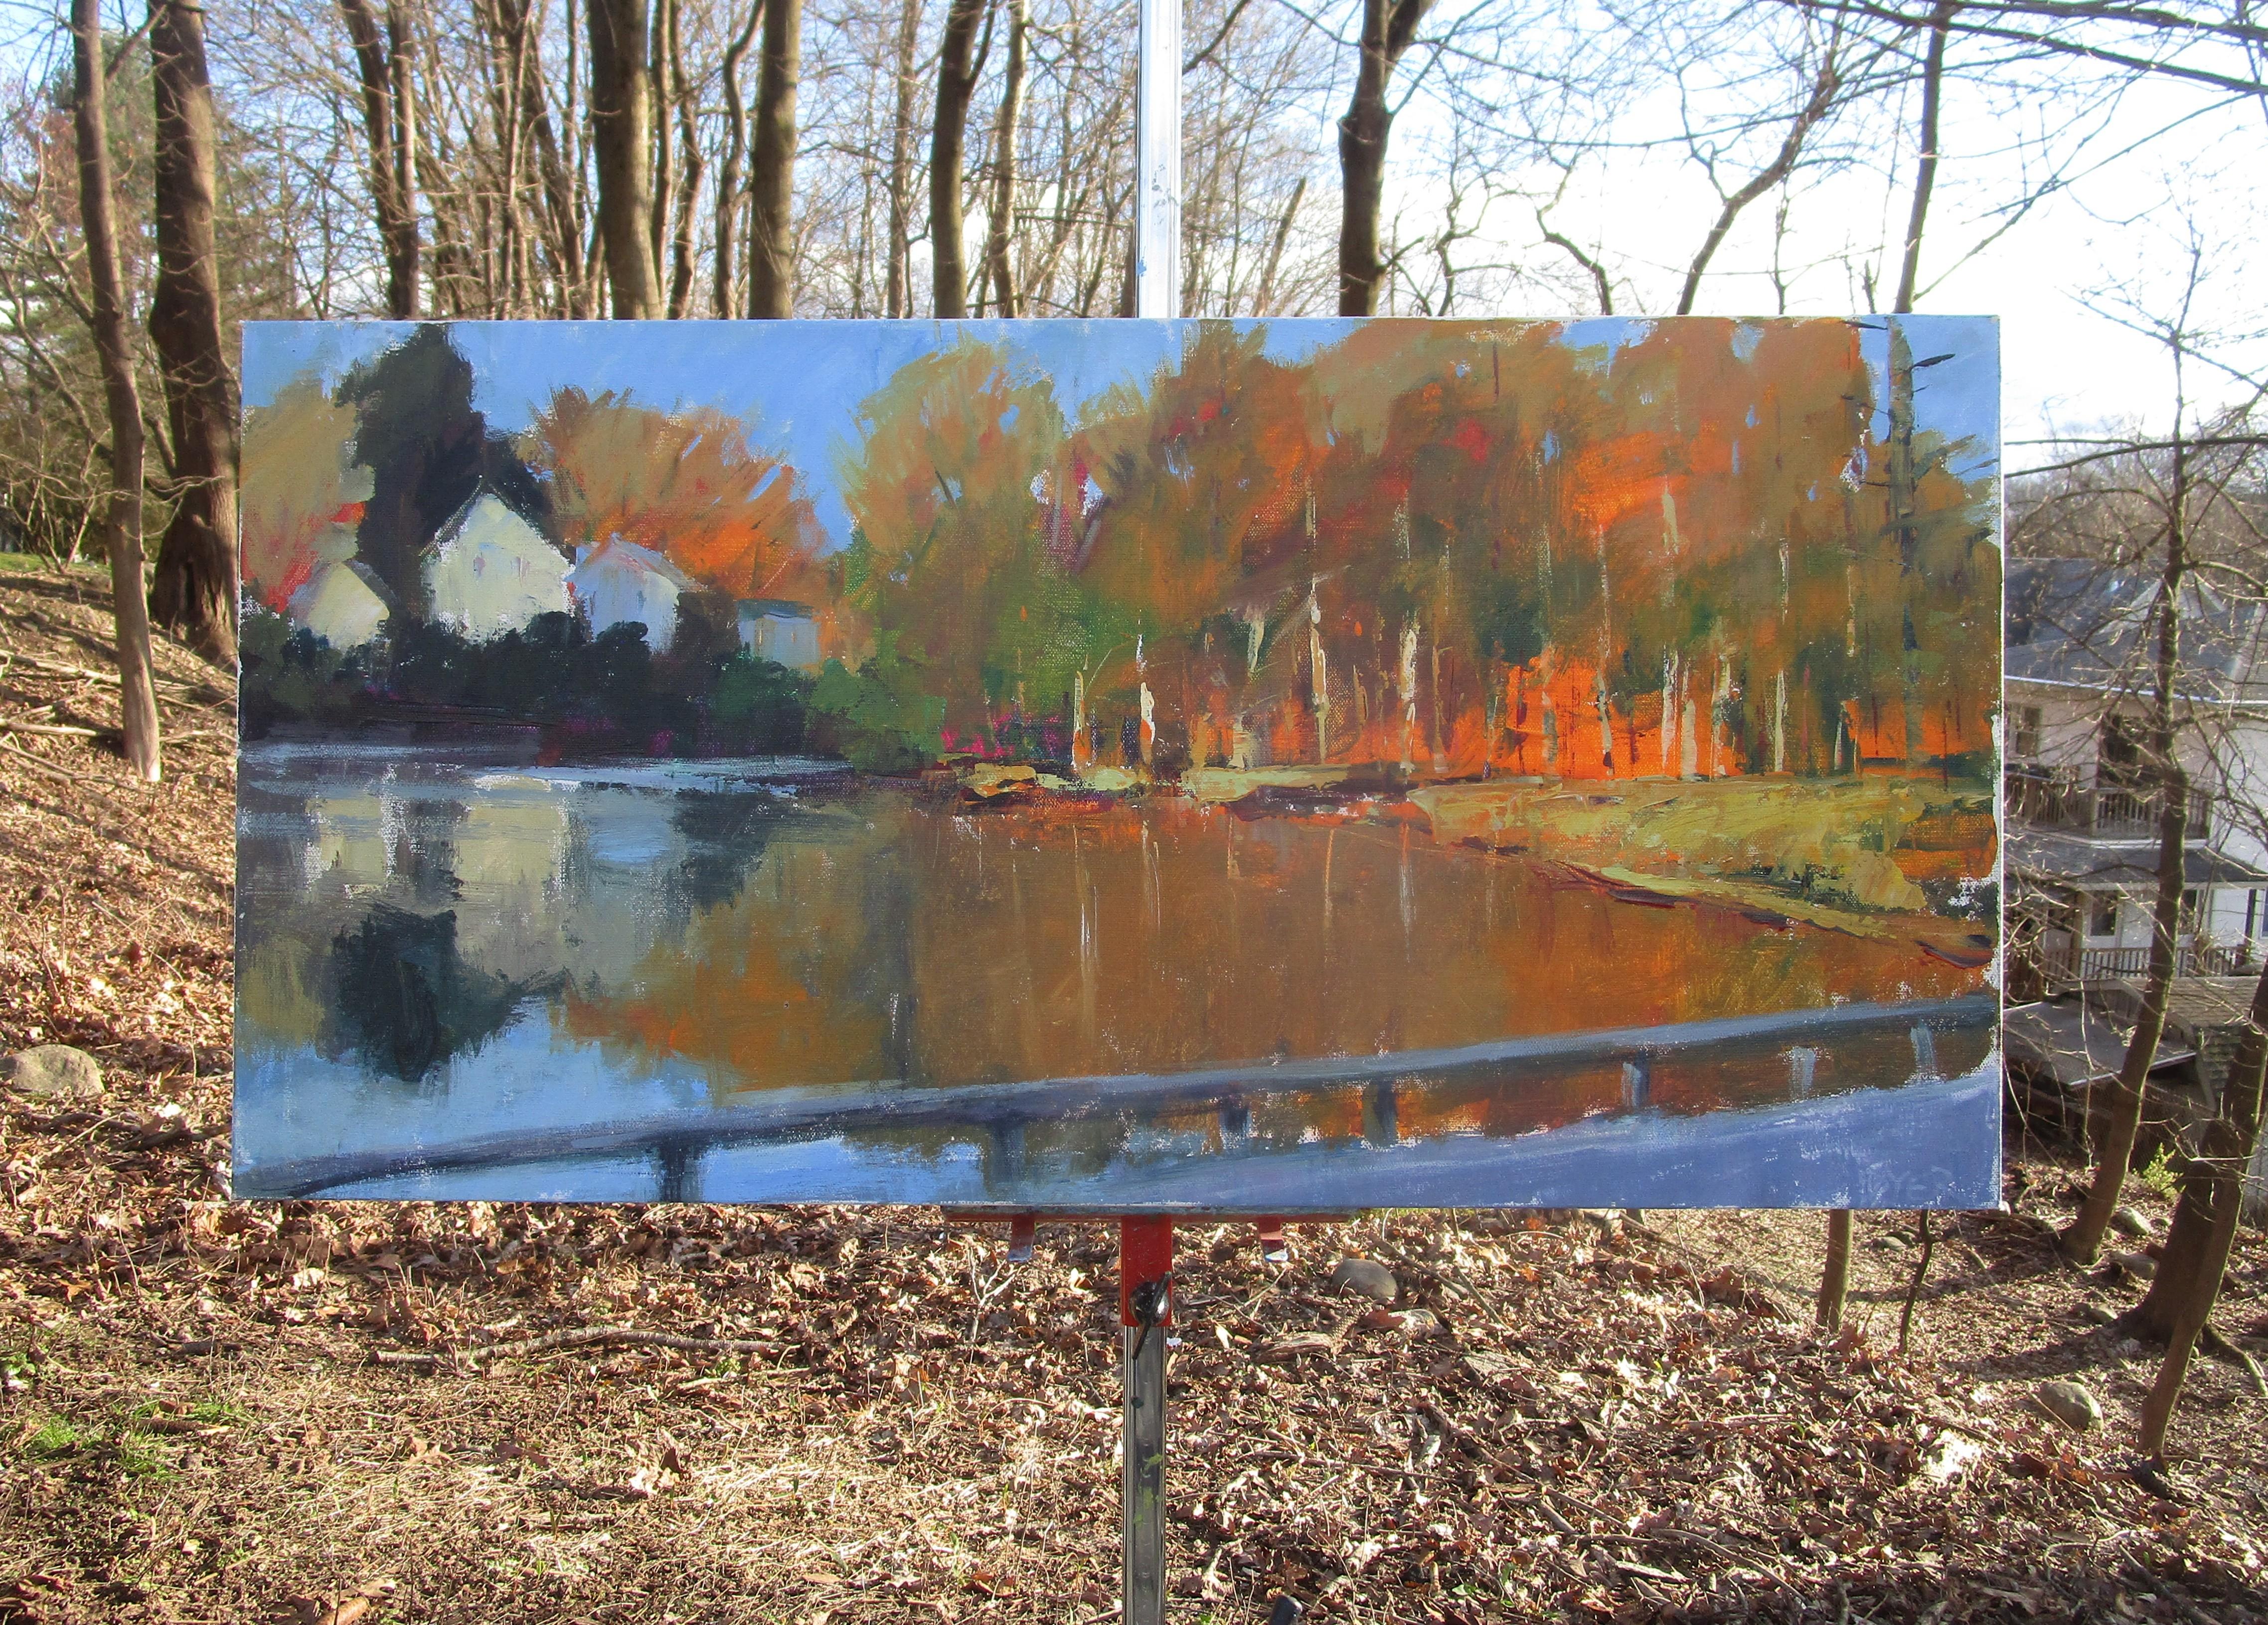 <p>Artist Comments<br>A small pond witnesses an evolving scenery. Initially devoid of houses, it now features a few nestled among the trees yet retains patches of woodland. The combination of brushwork and palette knife techniques lends depth and